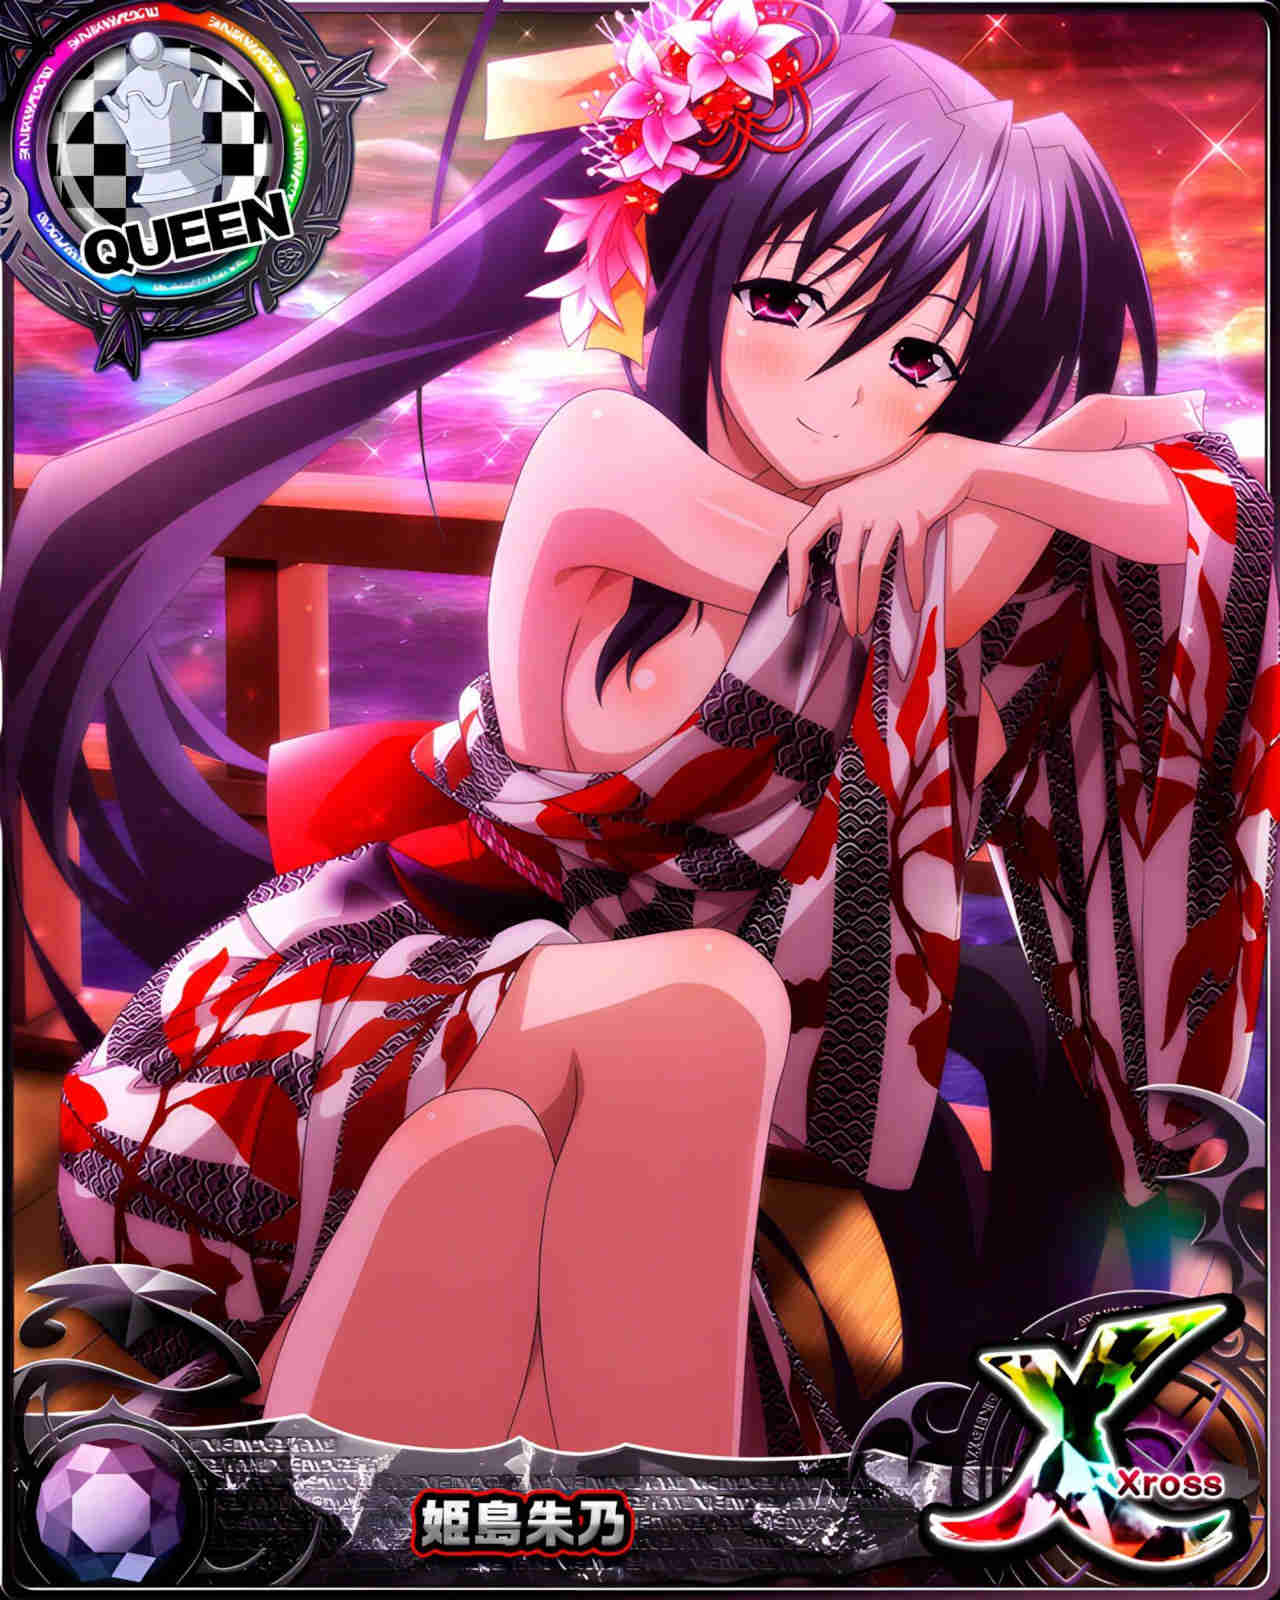 High School DxD game kicks off a new event with sexy yukatas 